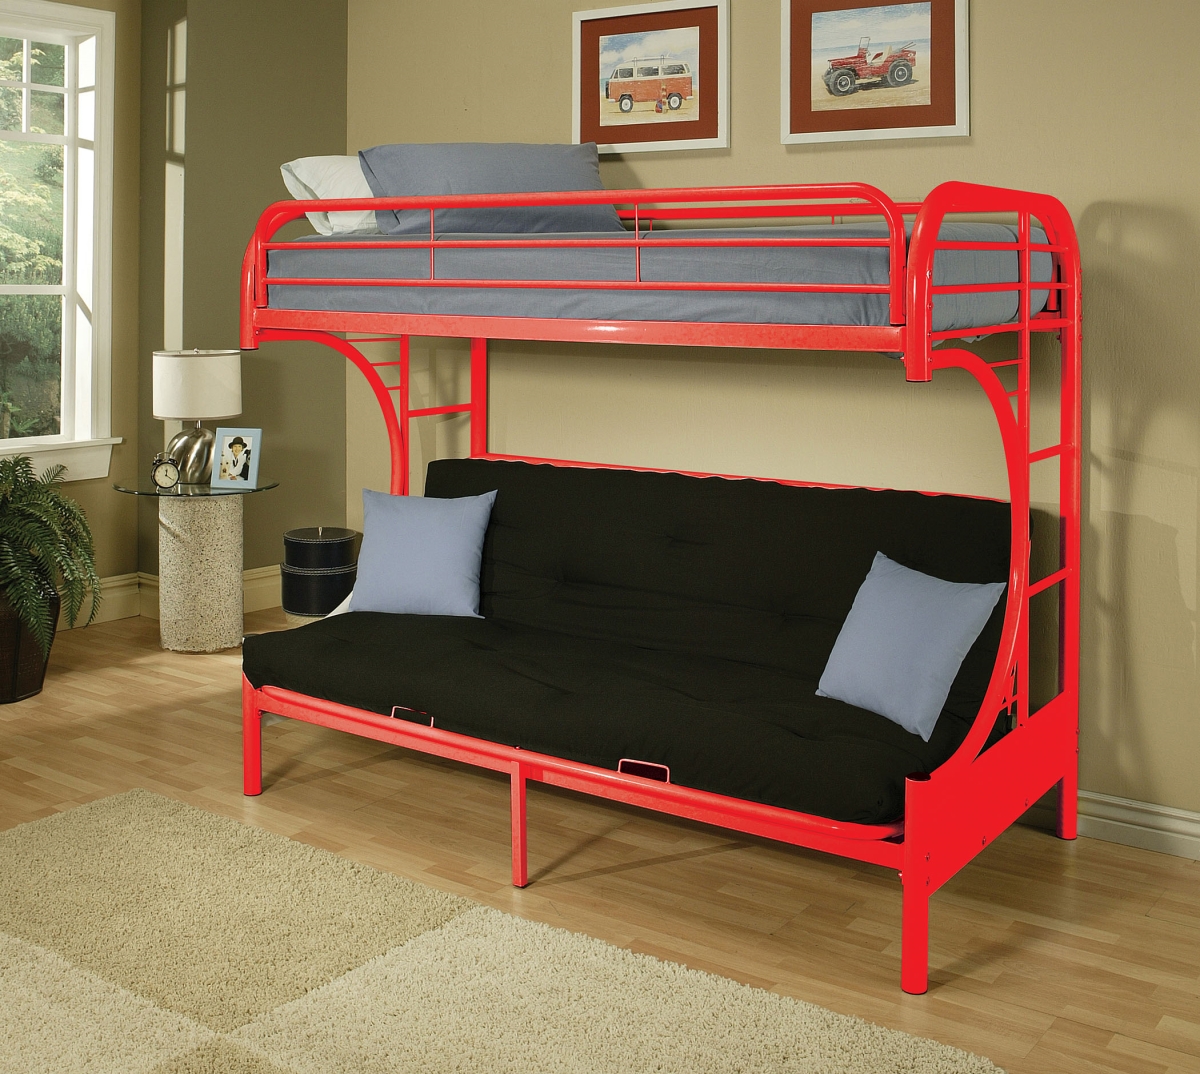 Home Roots Furniture 285190 65 X 78 X 41 In. Metal Tube Twin, Full & Futon Bunk Bed - Red